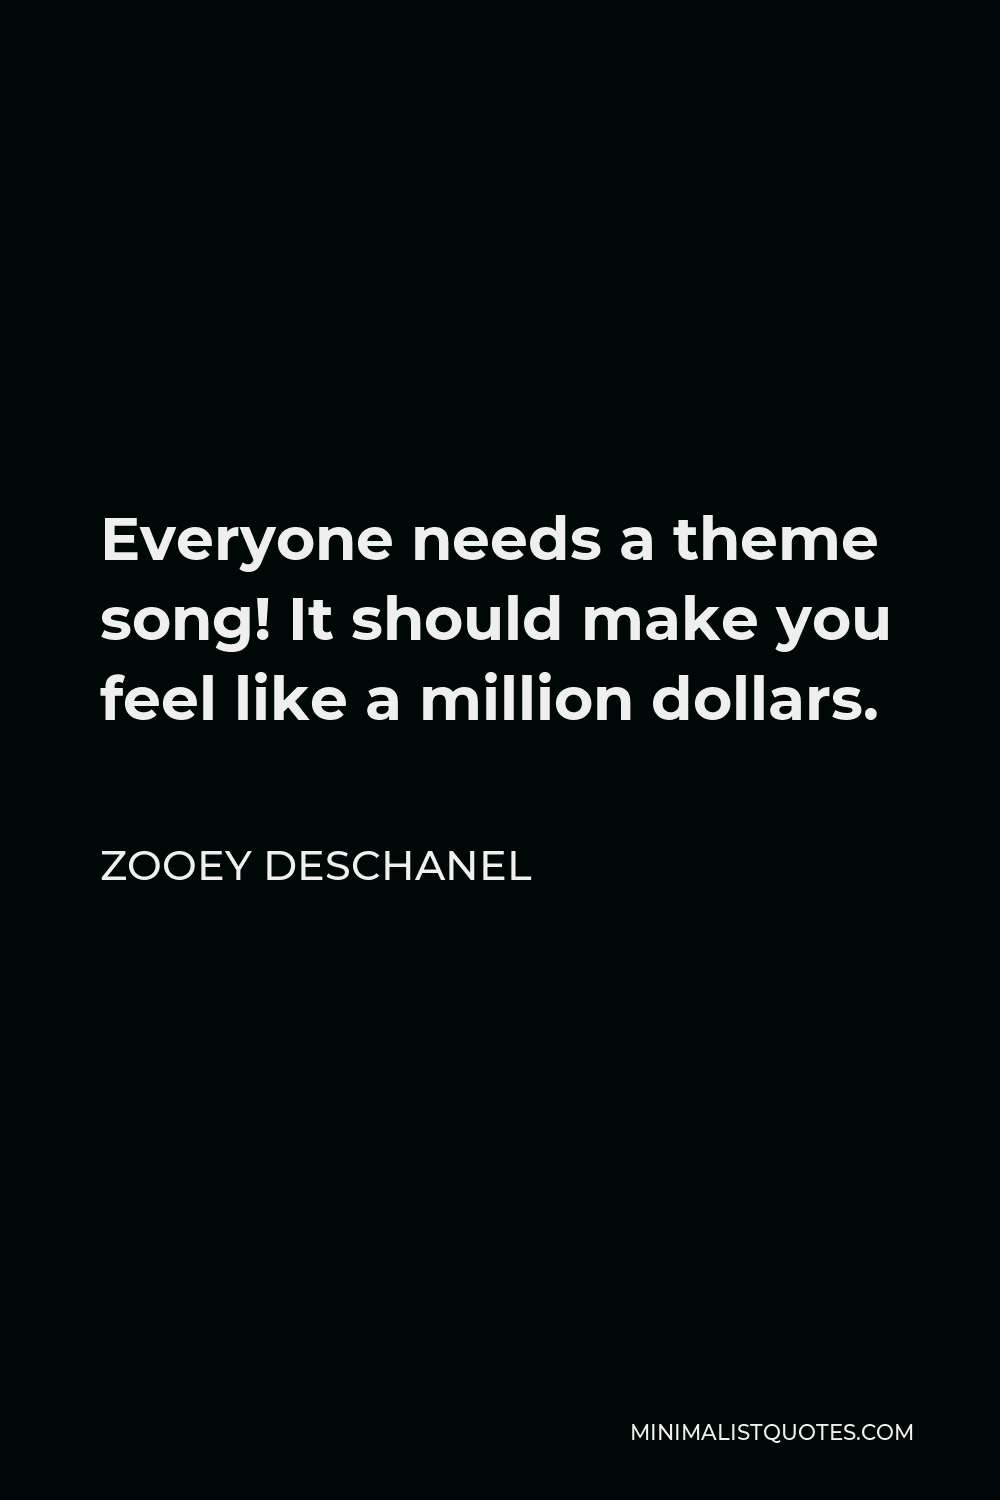 Zooey Deschanel Quote - Everyone needs a theme song! It should make you feel like a million dollars.